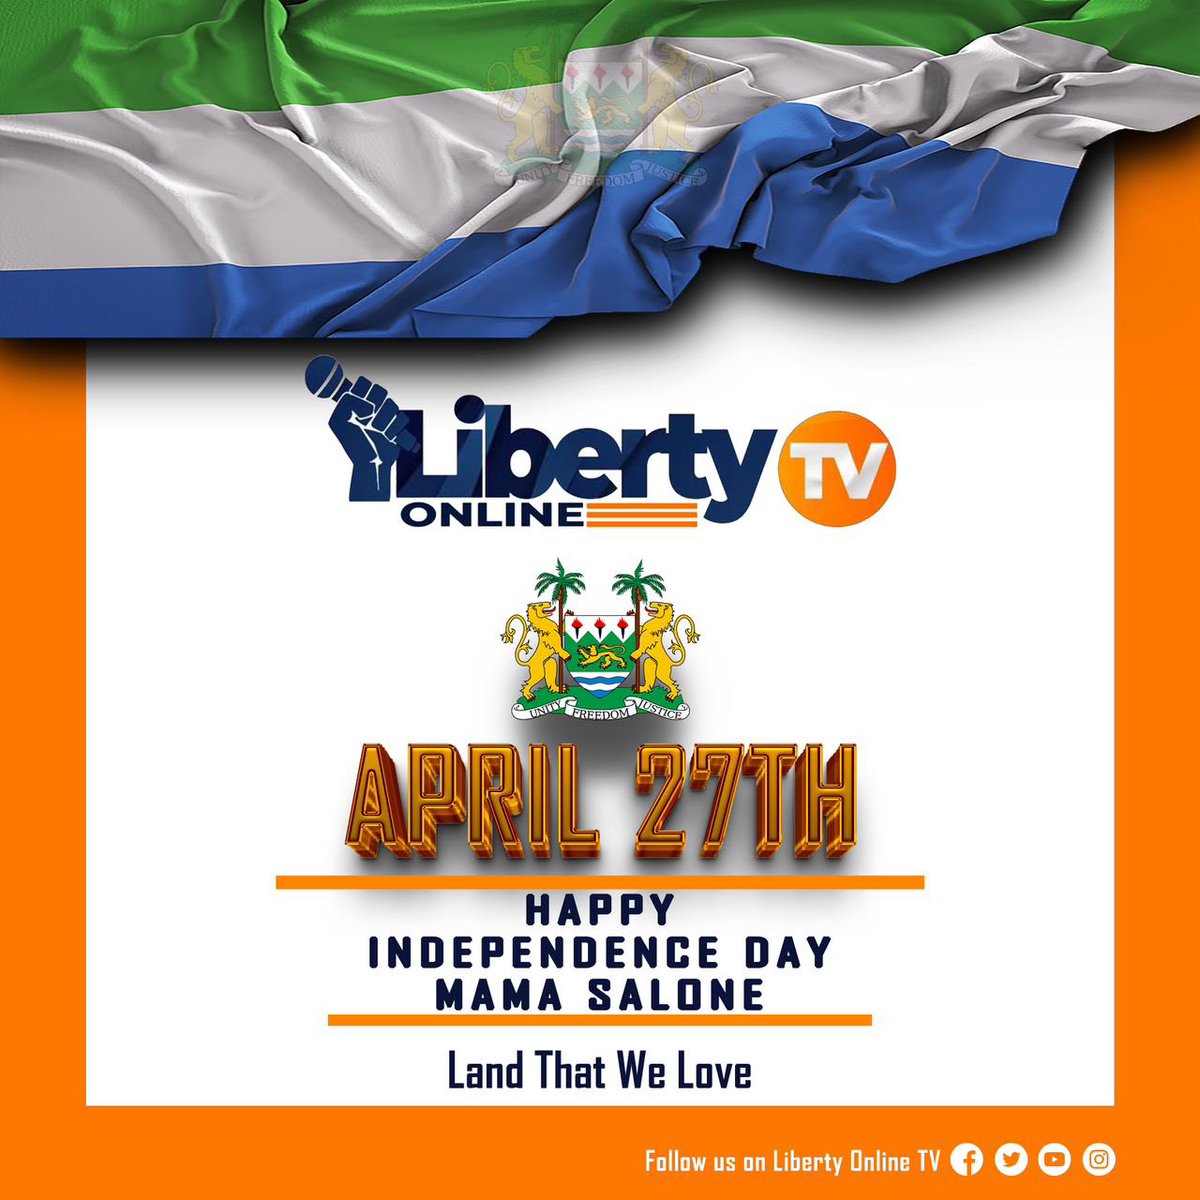 Happy Independence Day, Sierra Leone! Let's celebrate our freedom, unity, and diversity. Together, let's strive for a brighter future filled with peace, progress, and prosperity. Long live Sierra Leone! 🇸🇱✨🙏 #HappyIndependenceSierraLeone #SierraLeoneAt63 #Salone